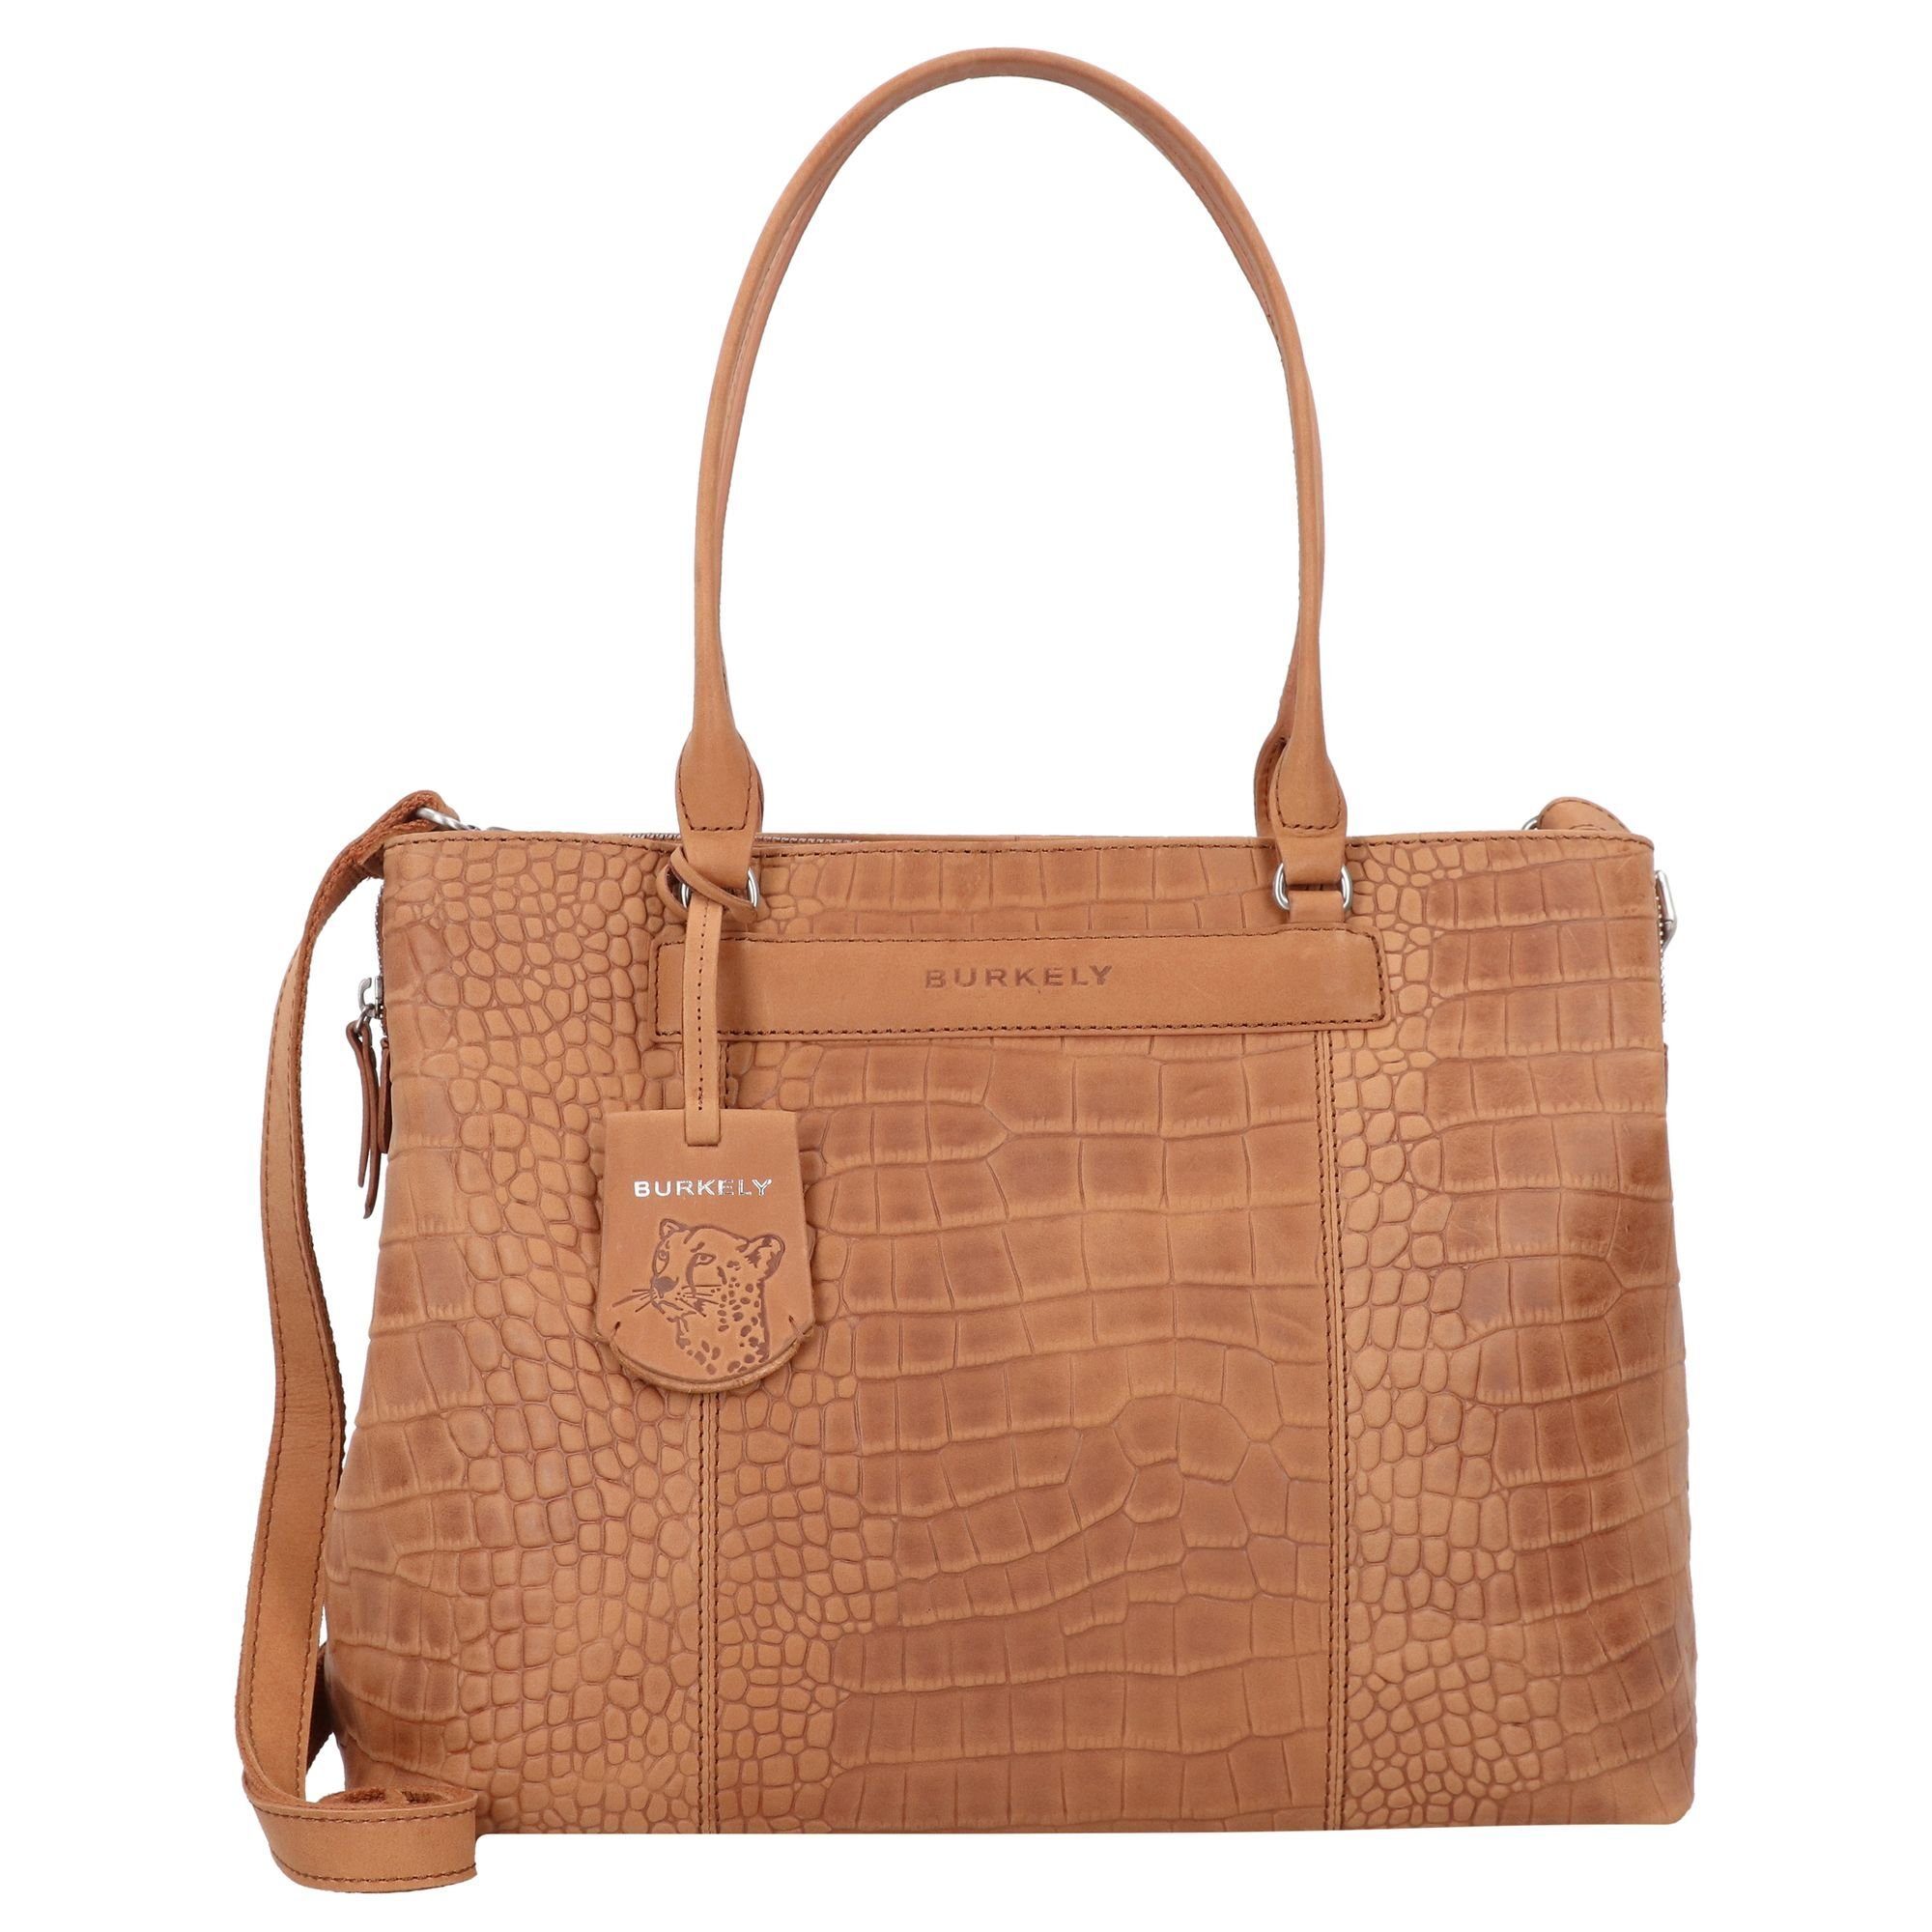 Burkely Schultertasche Casual Cayla, Leder